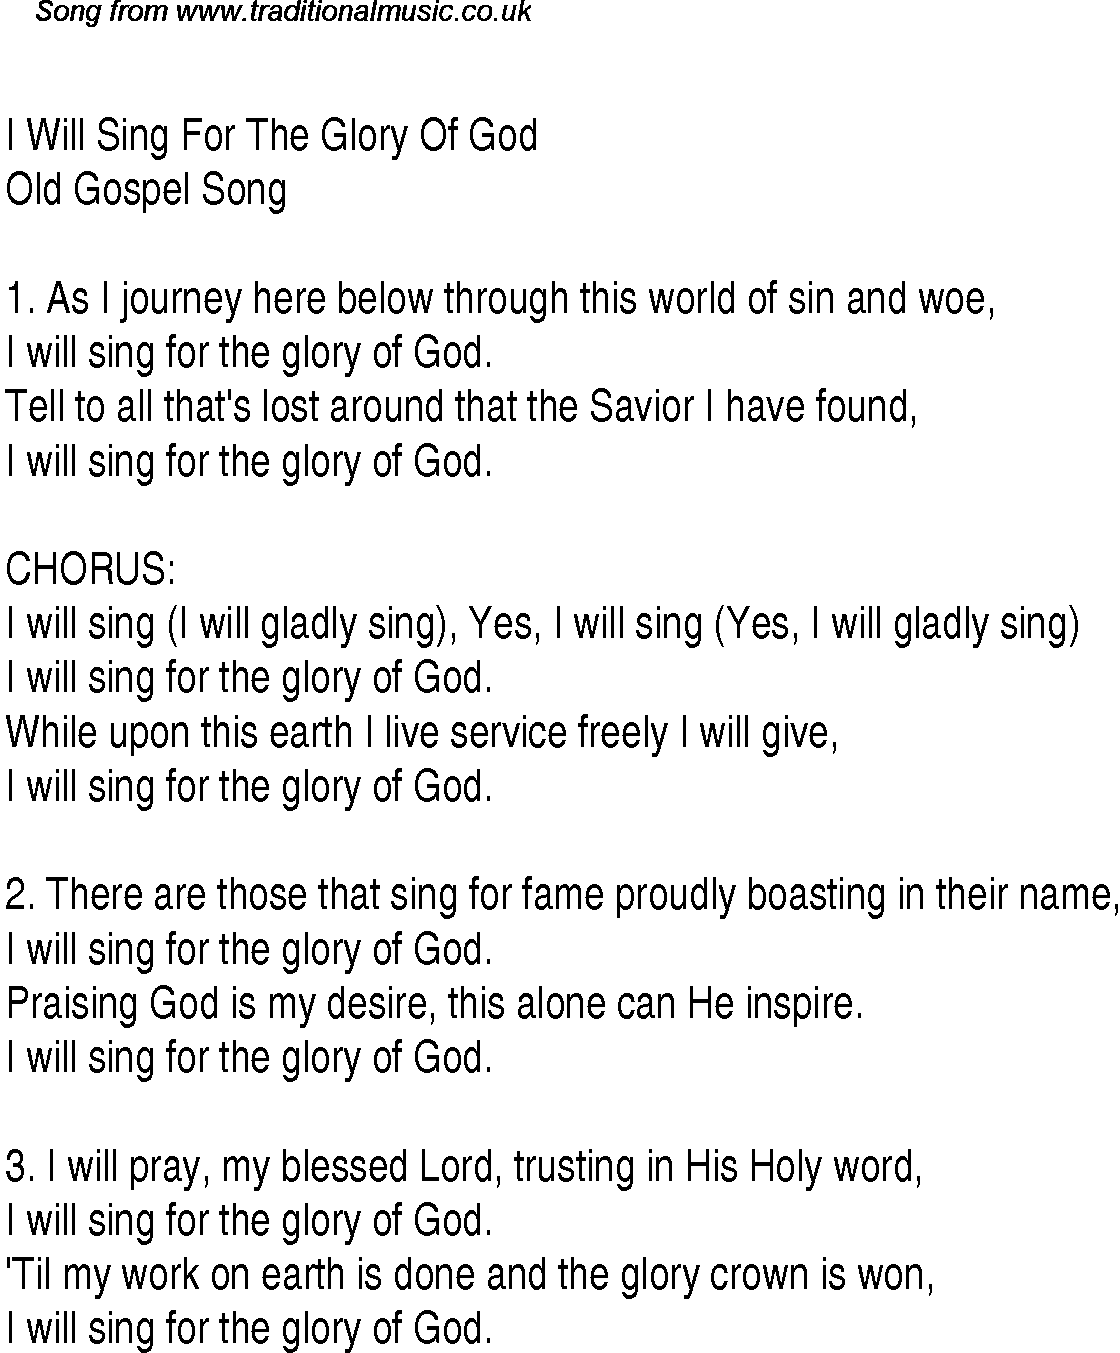 Gospel Song: i-will-sing-for-the-glory-of-god, lyrics and chords.